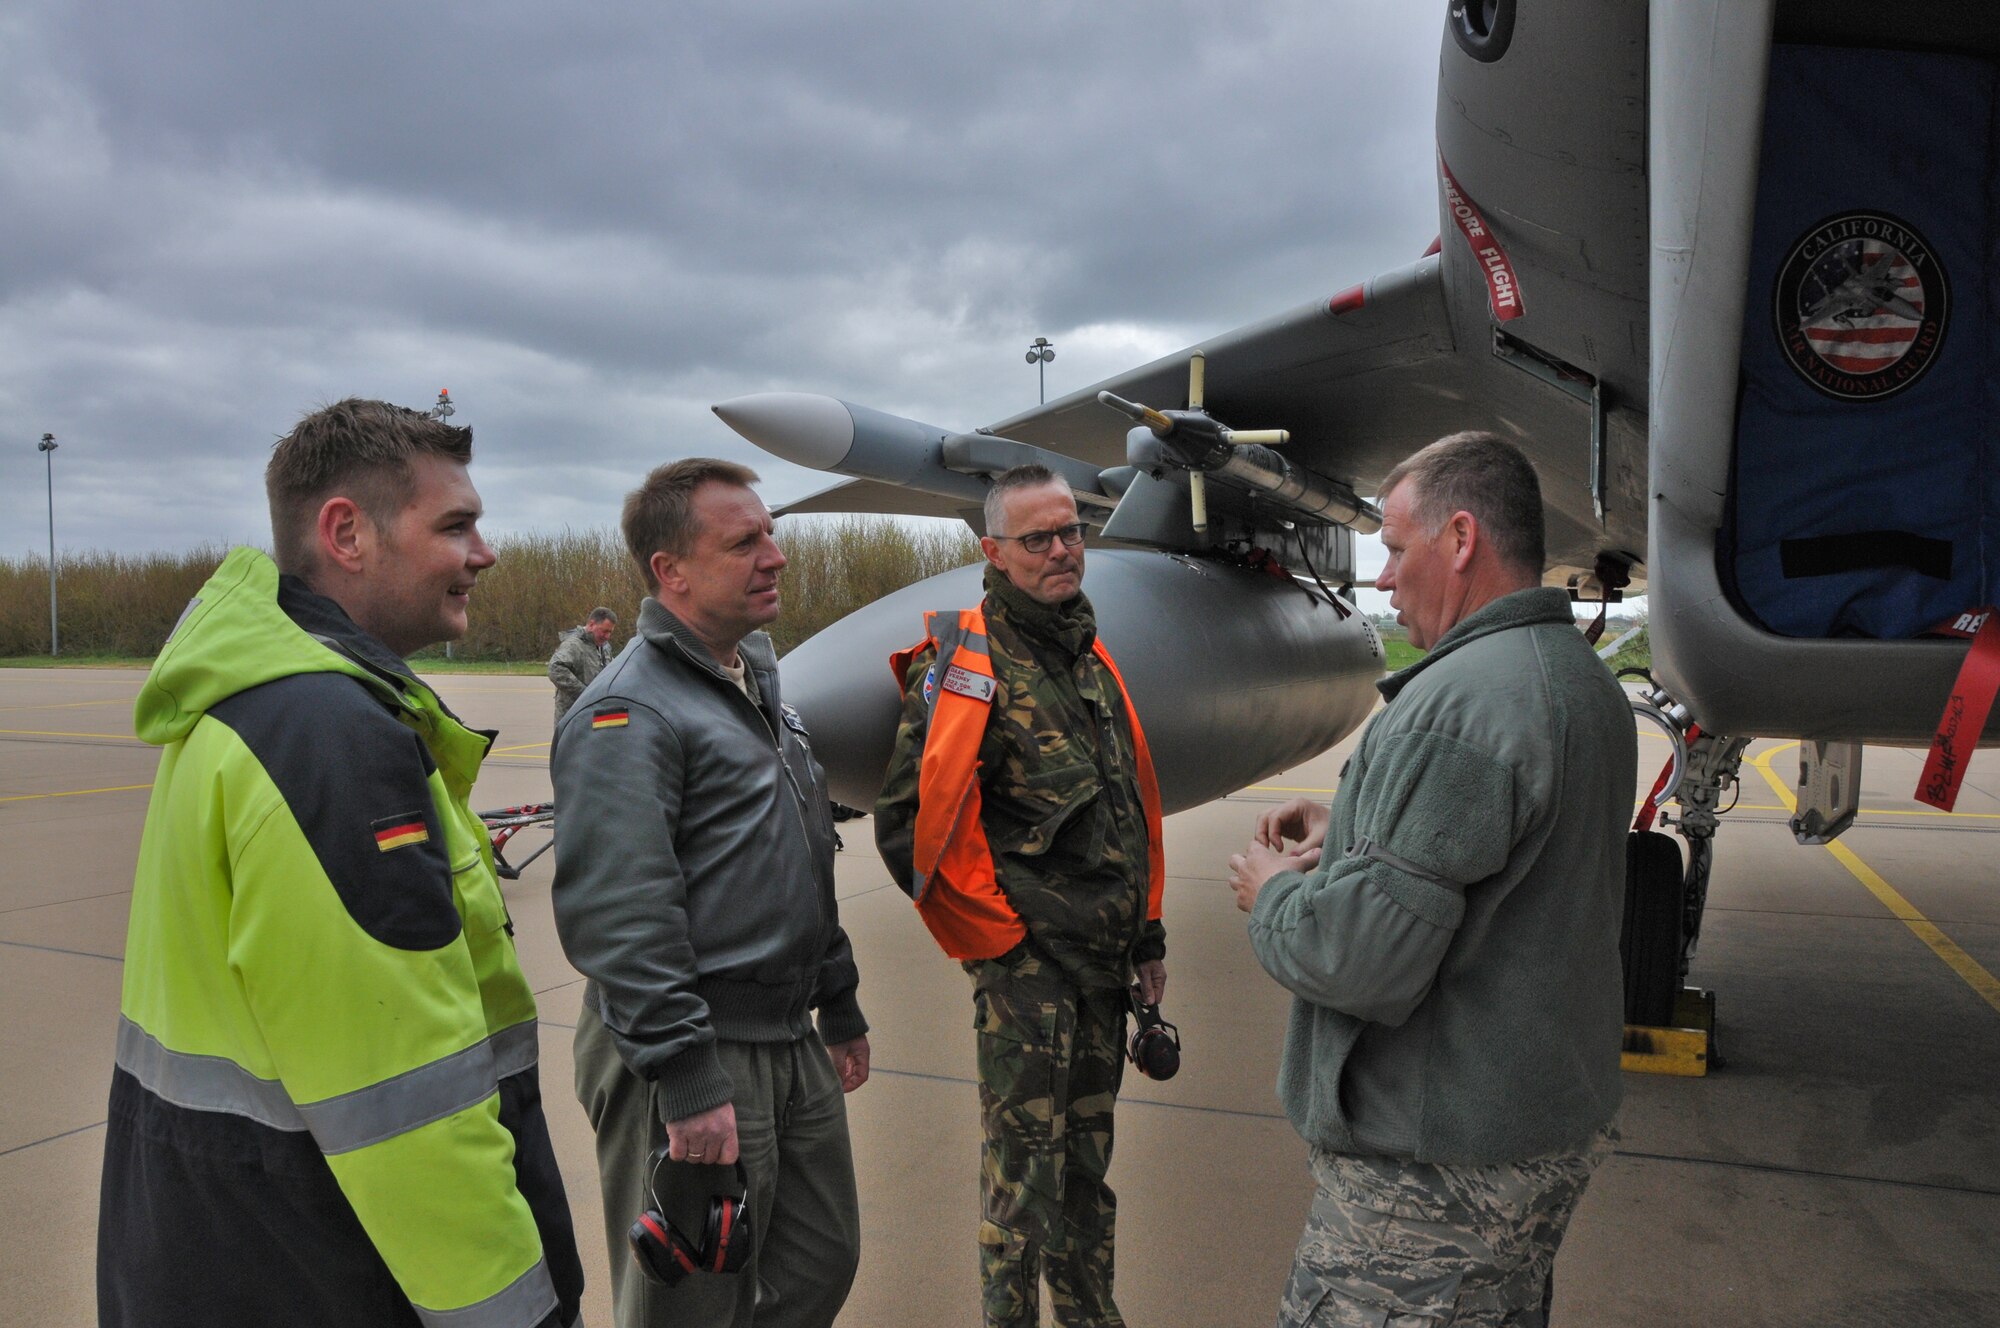 U.S. Air Force and Massachusetts Air National Guard Master Sgt. James Kelley conducts a tour of an F-15C Eagle aircraft for members of the German Air Force maintenance group during the Royal Netherlands Air Force Frisian Flag 2016 exercise, Leeuwarden Air Base, Netherlands, April 19, 2016.  The exercise is designed to foster military cooperation between participating nations and these types of exchanges help establish trust and relationships.   More than 70 aircraft and several hundred personnel from the United States, Netherlands, Belgium, France, Finland, Poland, Norway, United Kingdom, Germany and Australia are taking part. (U.S. Air National Guard photo by 1st Lt. Anthony Mutti /Released)
